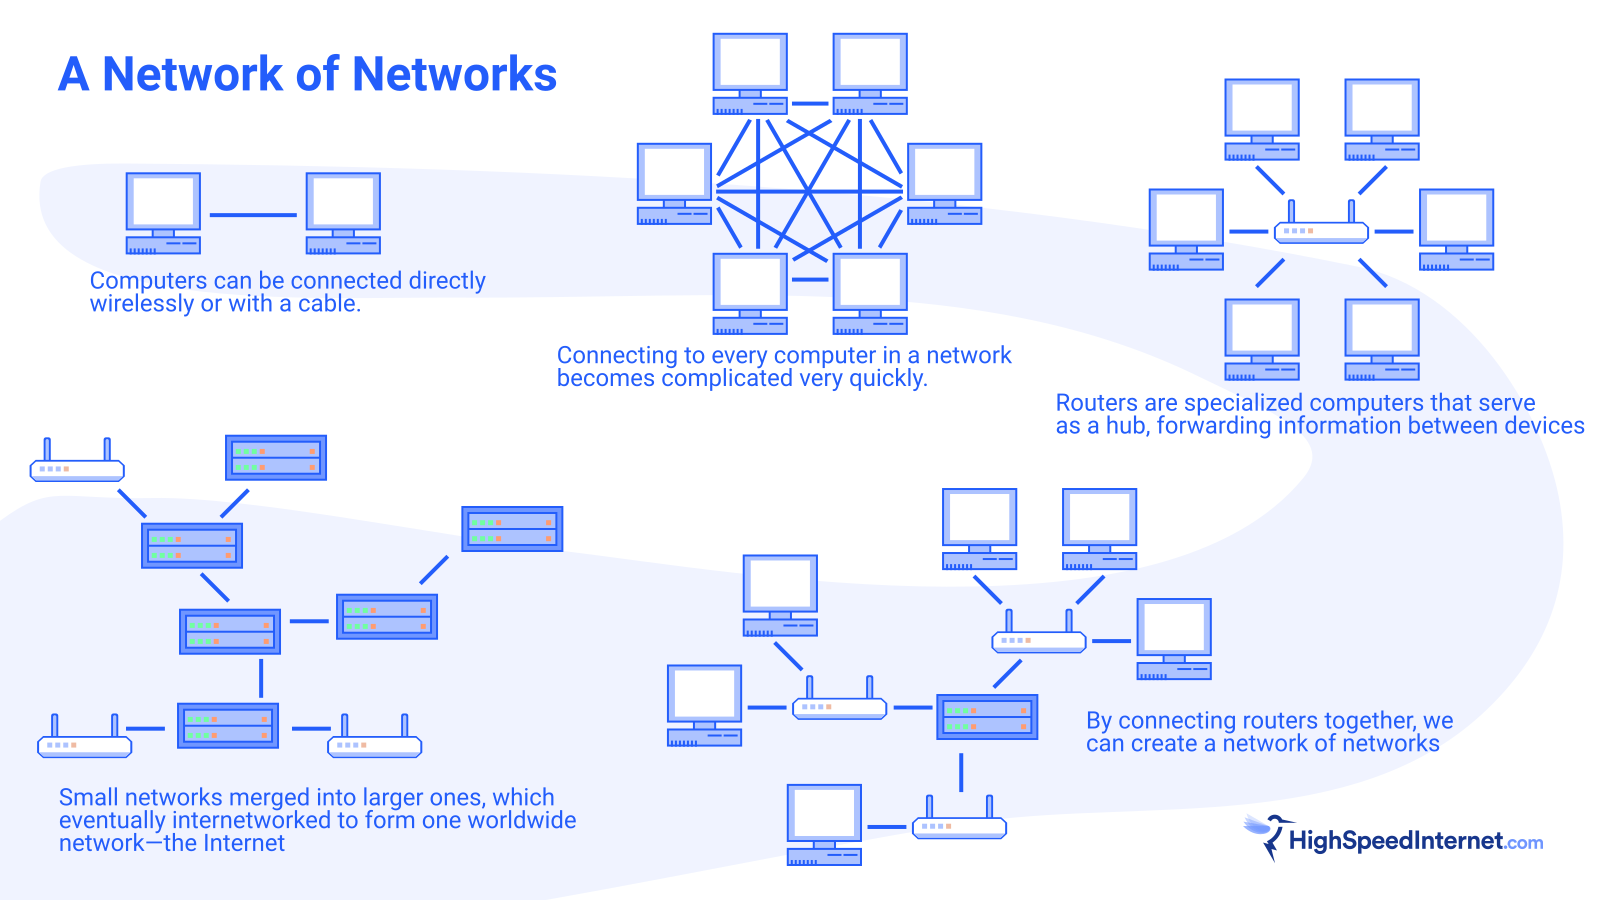 A Network of Networks